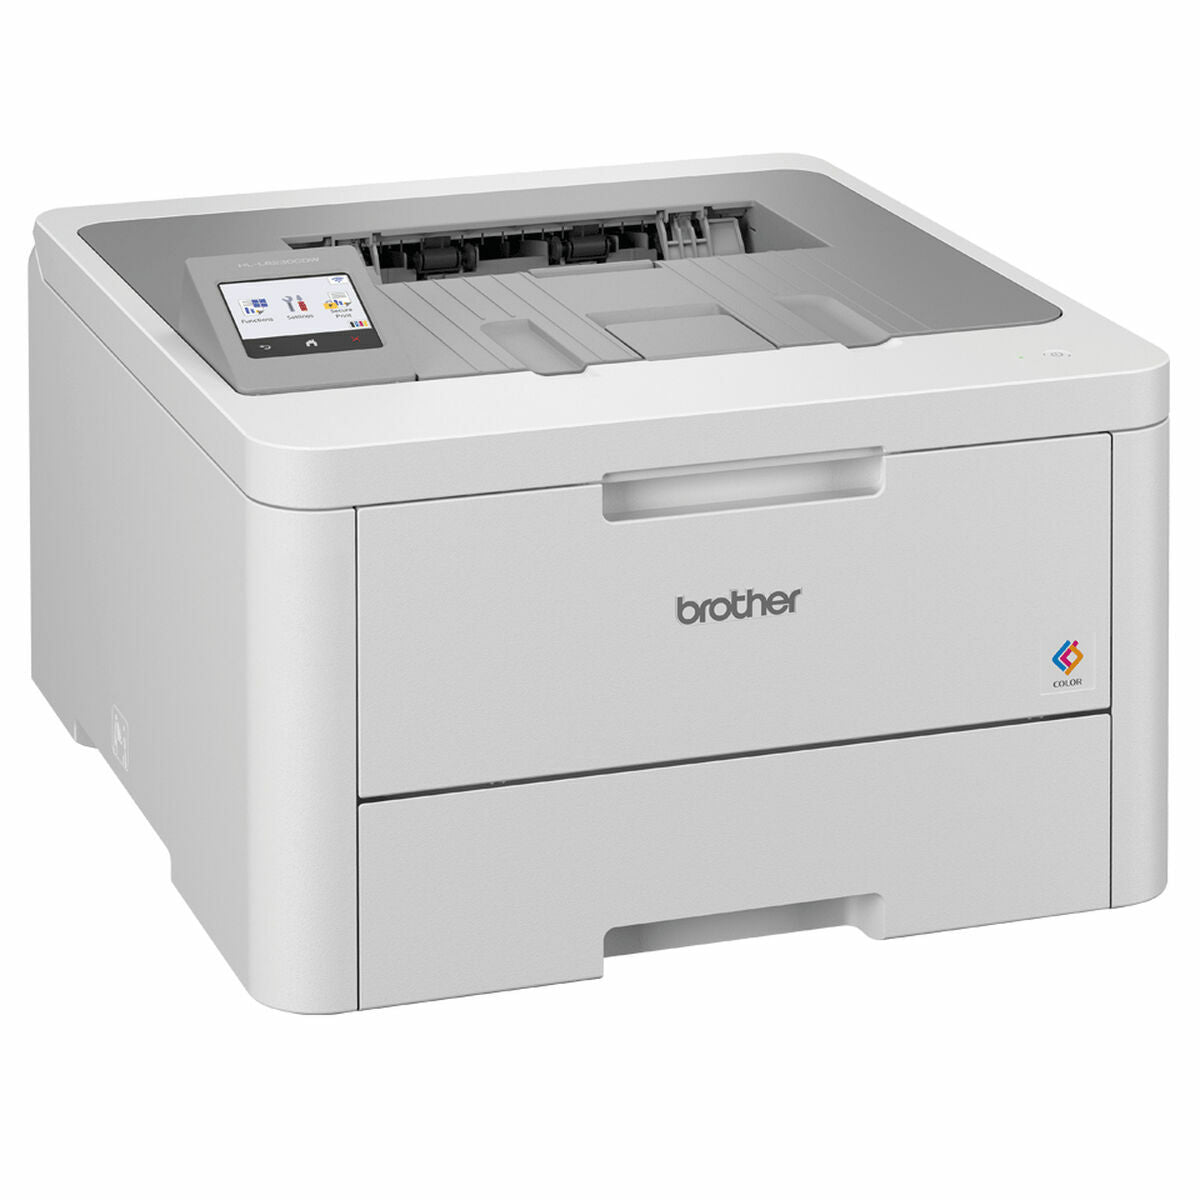 Multifunction Printer Brother HLL8230CDWRE1, Brother, Computing, Printers and accessories, multifunction-printer-brother-hll8230cdwre1, Brand_Brother, category-reference-2609, category-reference-2642, category-reference-2645, category-reference-t-19685, category-reference-t-19911, category-reference-t-21378, category-reference-t-25692, computers / peripherals, Condition_NEW, office, Price_300 - 400, Teleworking, RiotNook